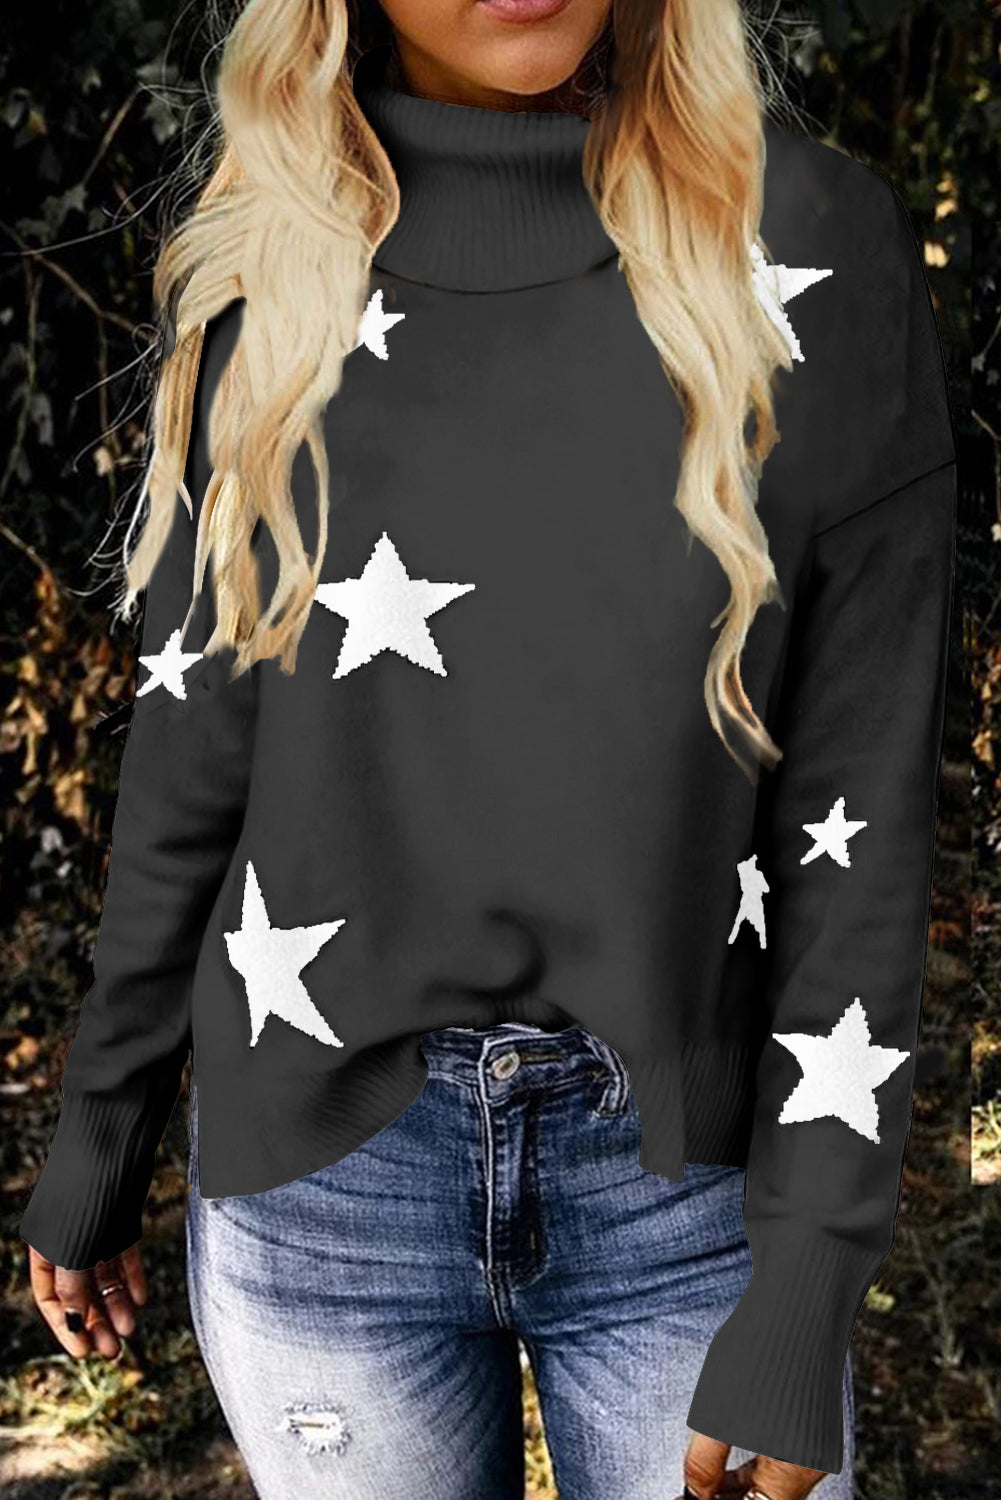 Women's Casual Knit Sweater Top Turtleneck Dropped Sleeve Star Print Sweater